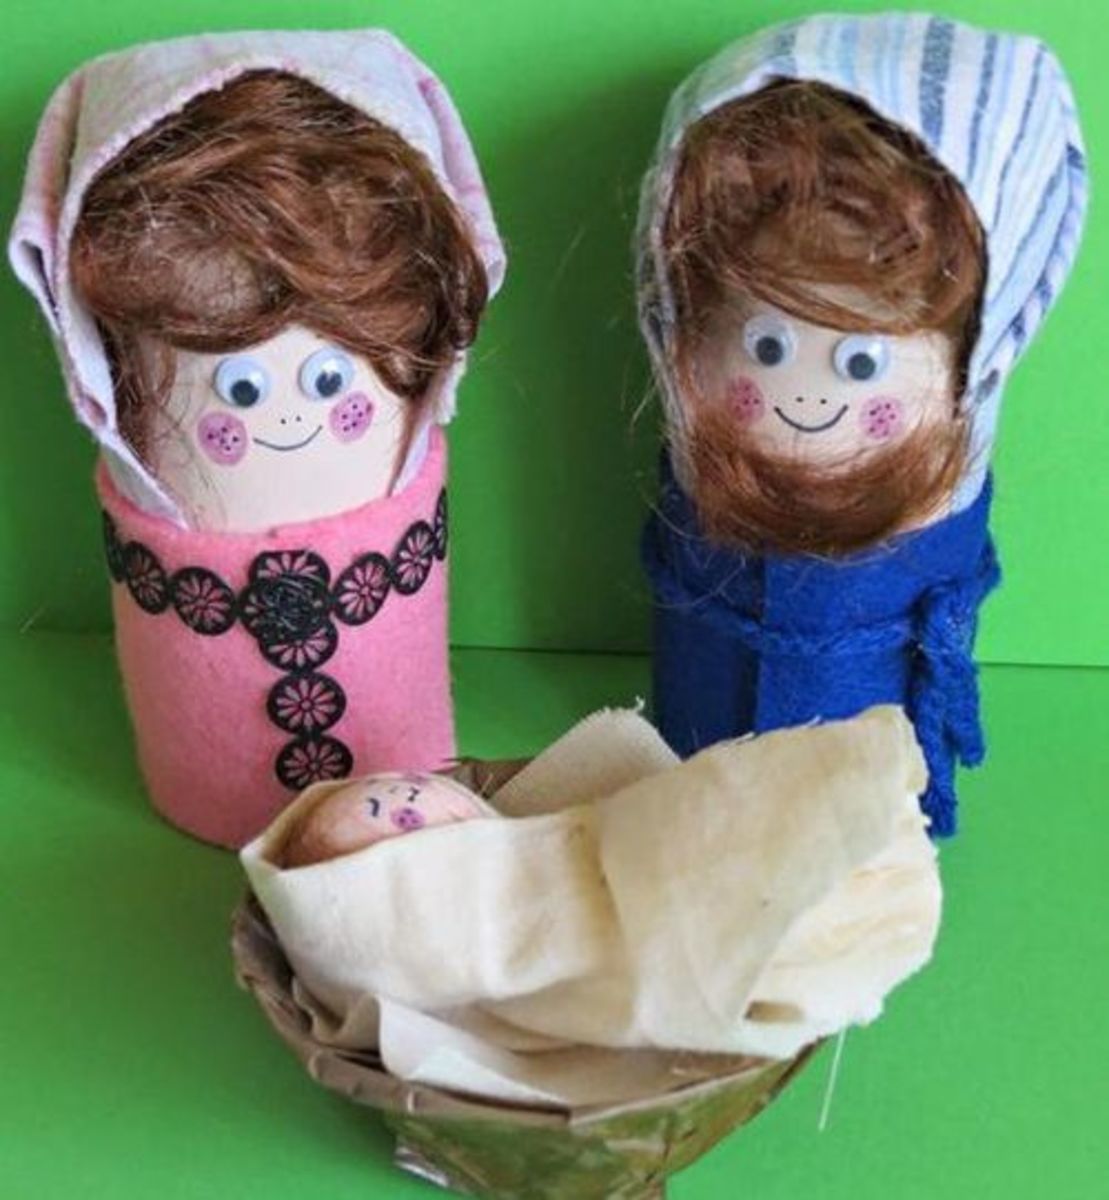 paper-roll-baby-dolls-the-triplets